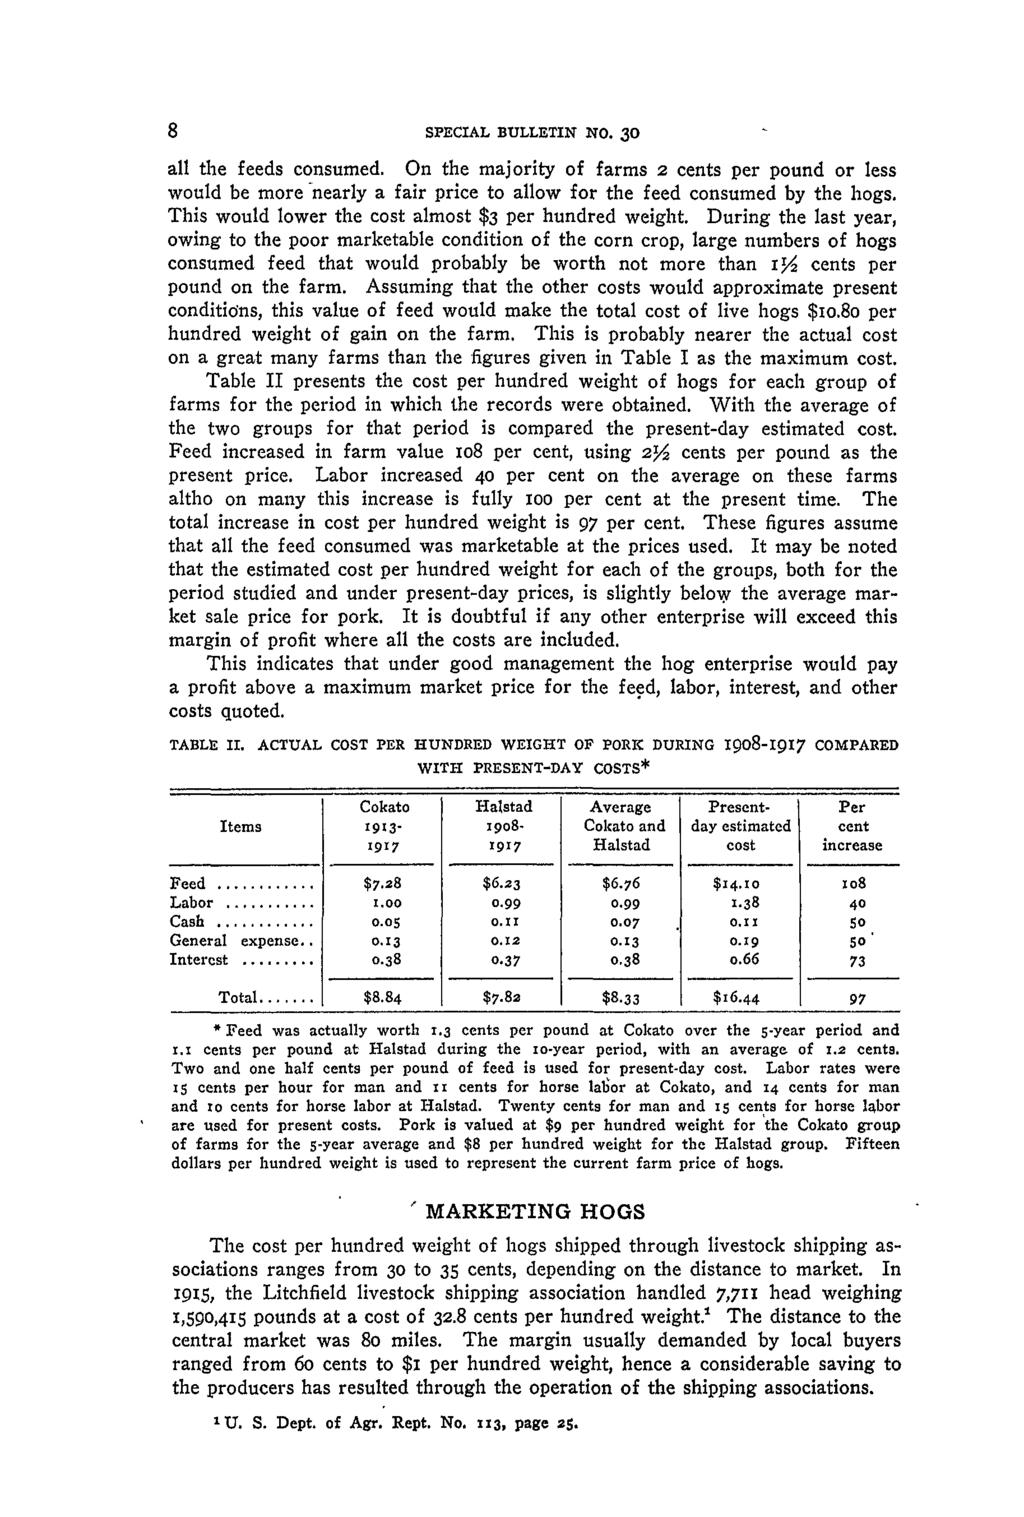 8 SPECIAL BULLETIN NO. 30 all the feeds consumed. On the majority of farms 2 cents per pound or less would be more -nearly a fair price to allow for the feed consumed by the hogs.